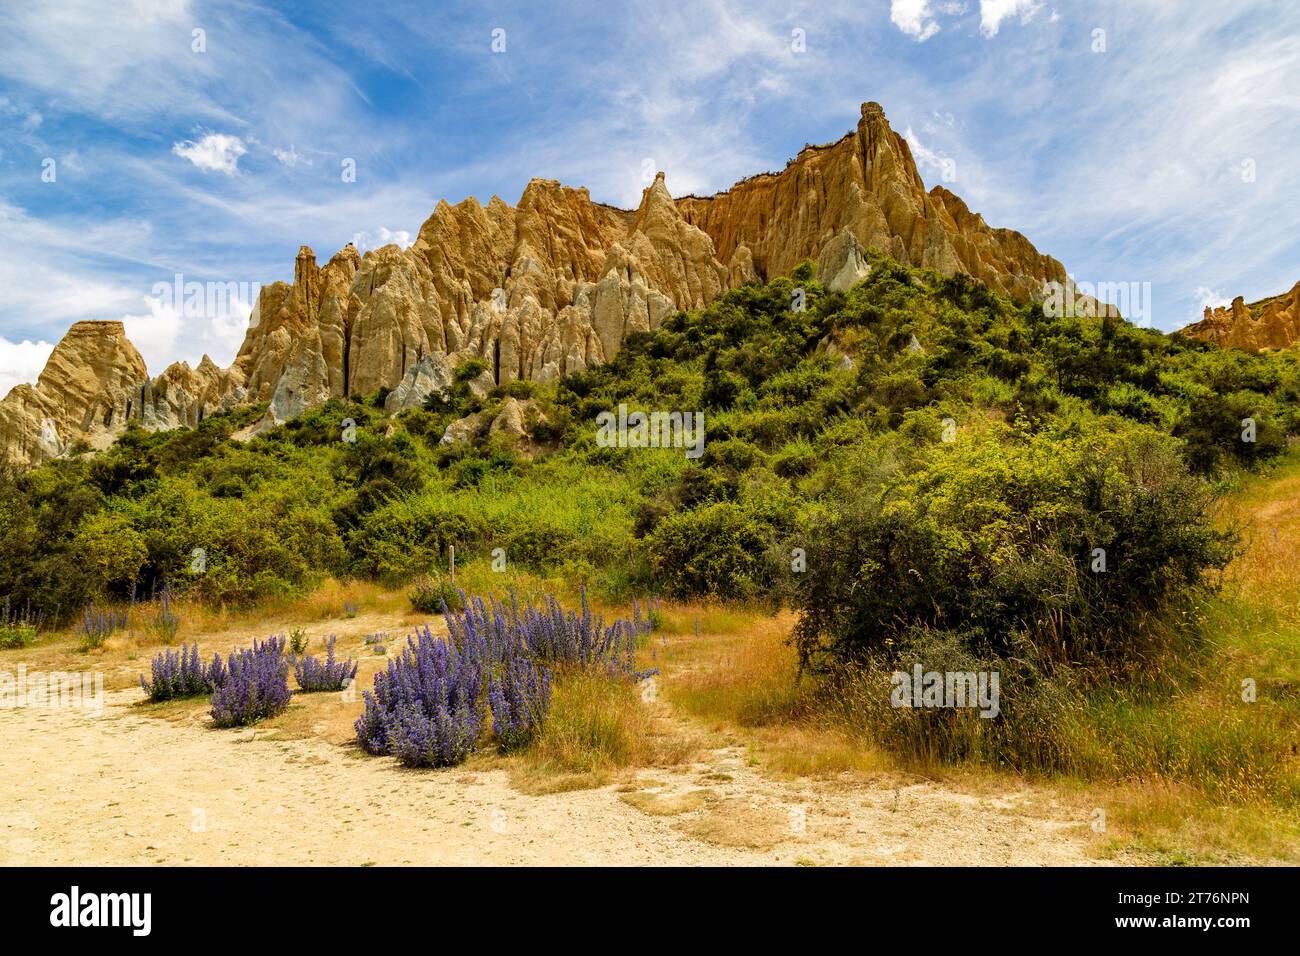 The Clay Cliffs in Omarama were formed over millions of years by natural erosion and sedimentation. Found in New Zealand south island in Waitaki area. Stock Photo